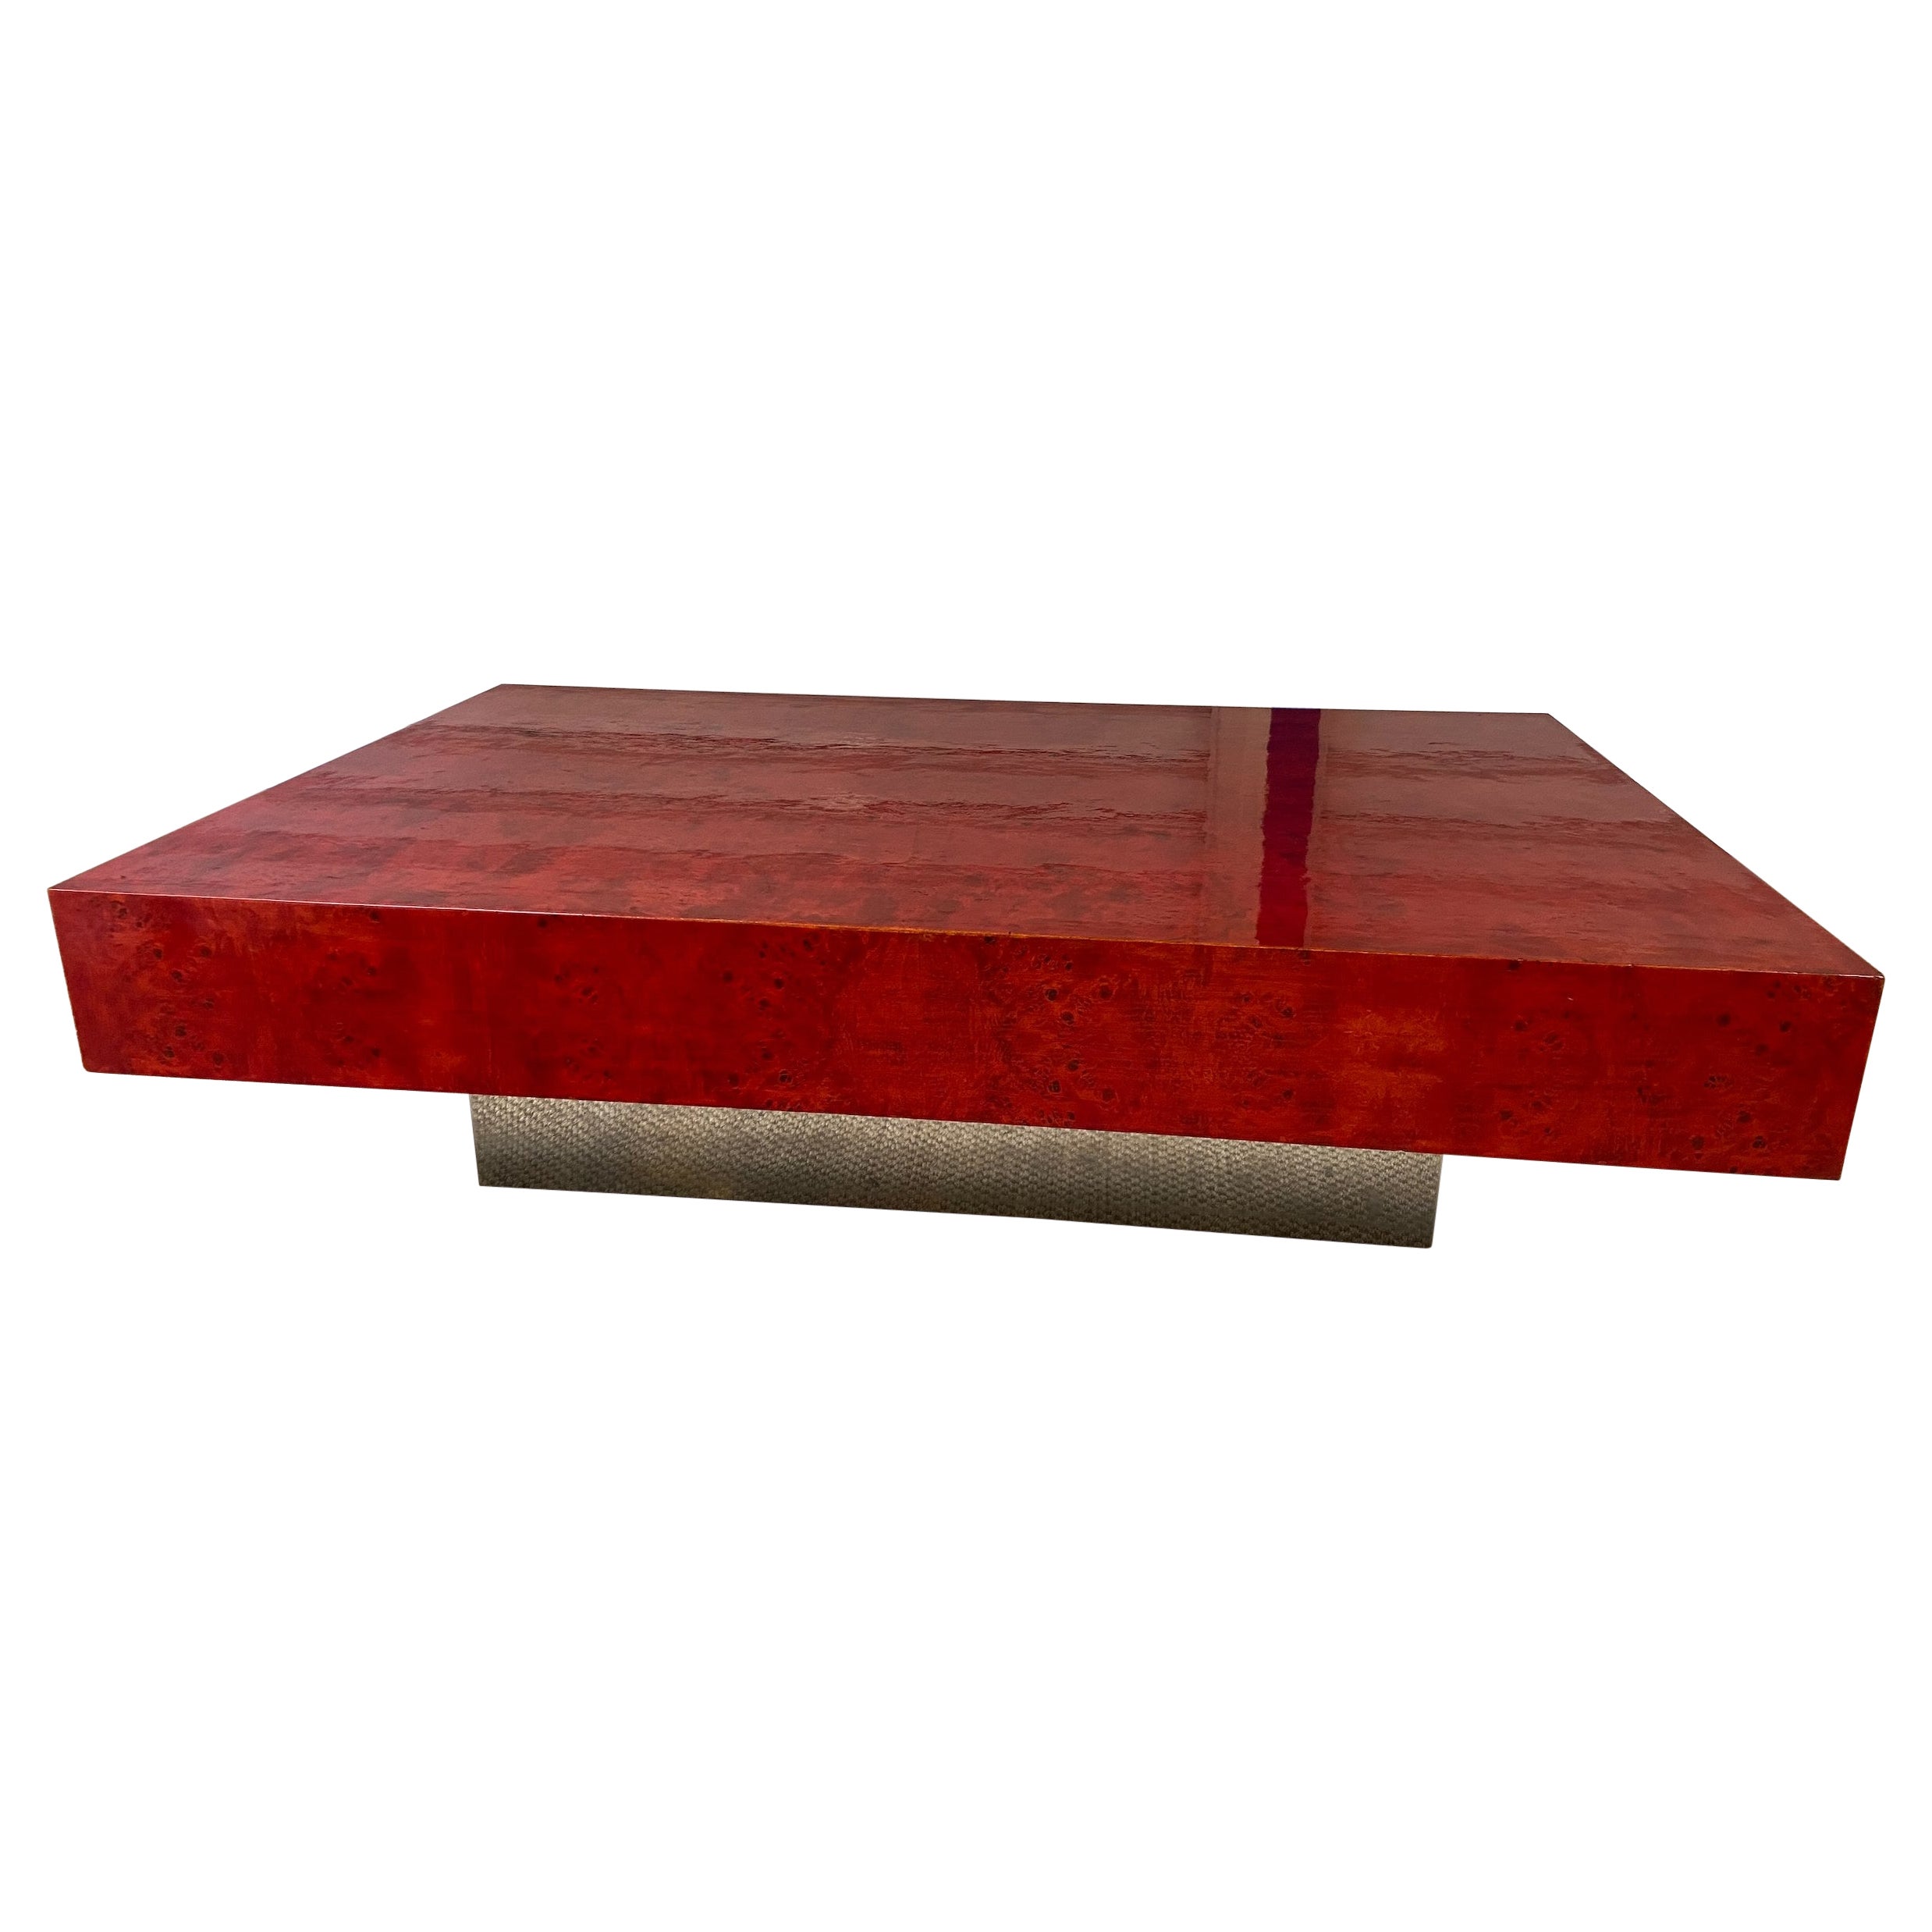 Red Coffee Table by Willy Rizzo, circa 1970